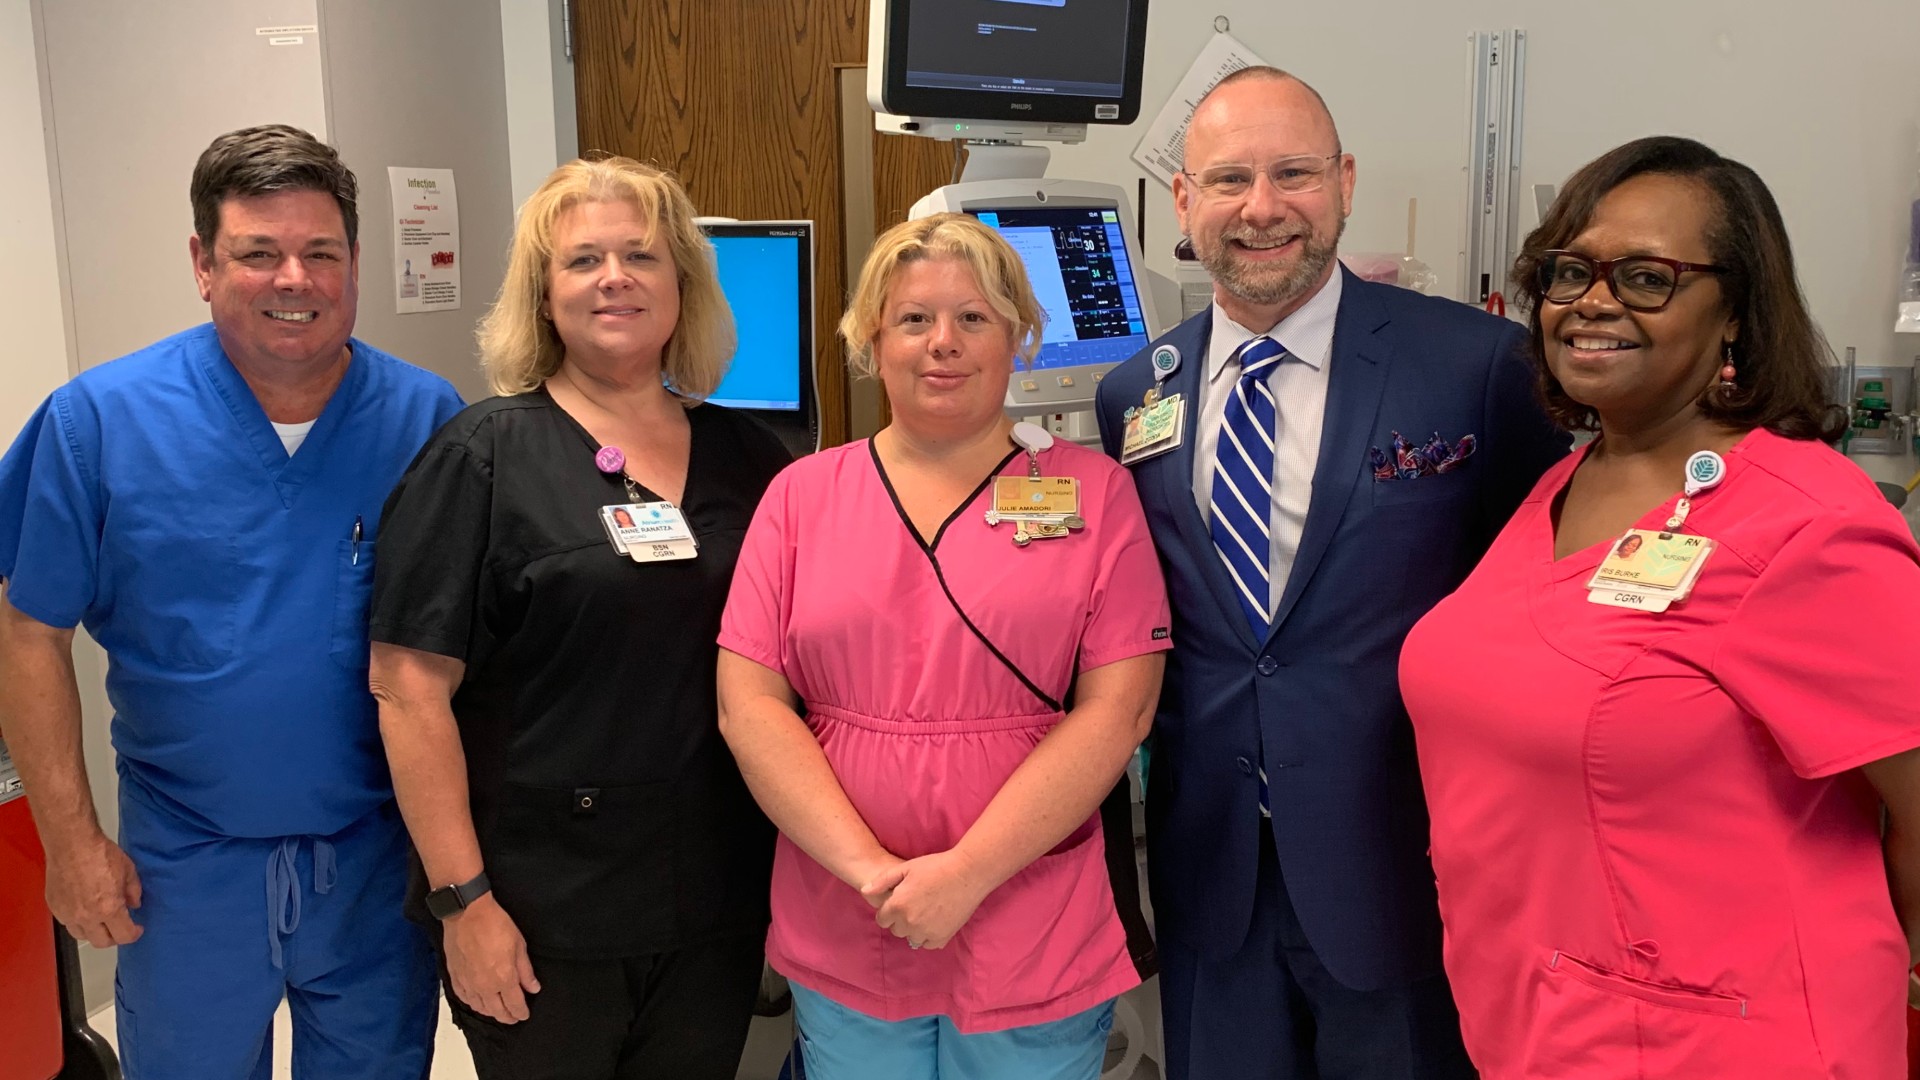 One of the first FDA-approved endobronchial valve lung volume reduction procedures in North Carolina was performed on May 21, 2019, by Michael Zgoda, MD, and the care team with University Pulmonary Associates at Atrium Health University City hospital. 